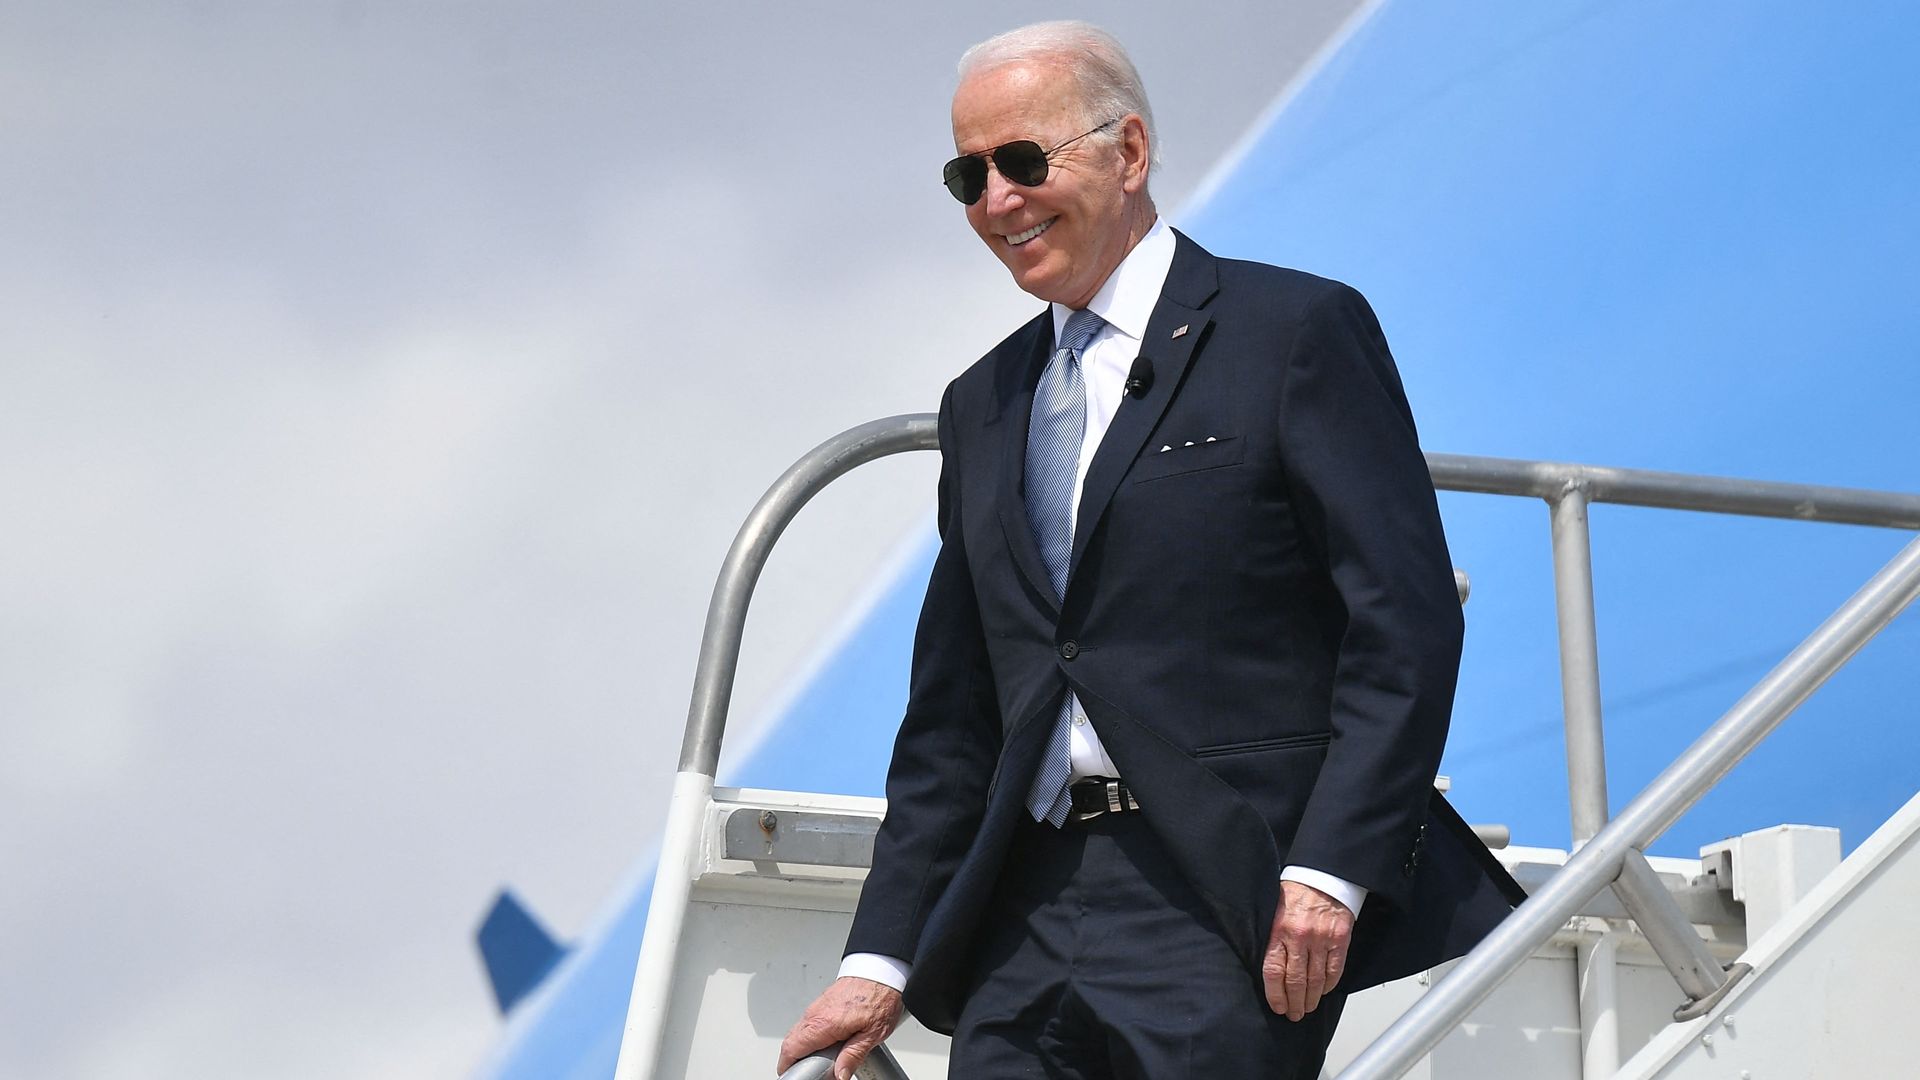 President Biden is seen deplaning from Air Force One in Portland, Ore.